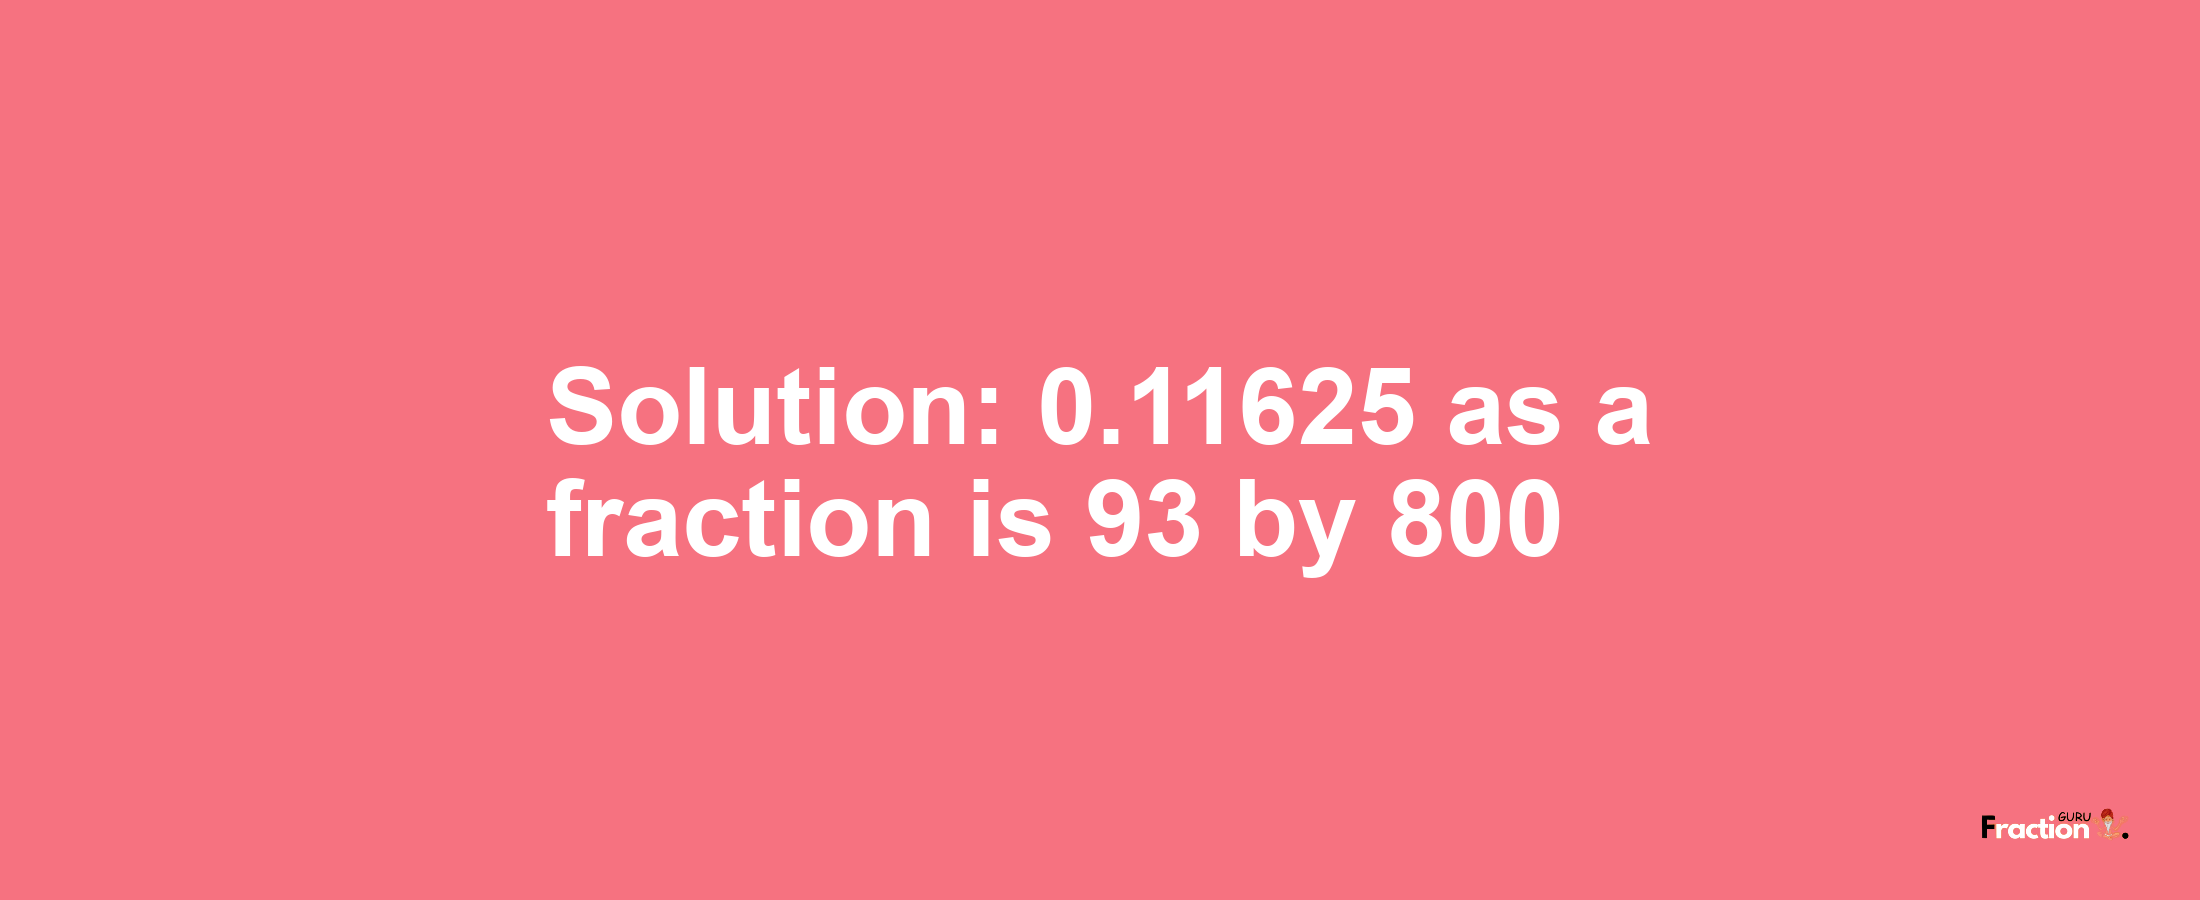 Solution:0.11625 as a fraction is 93/800